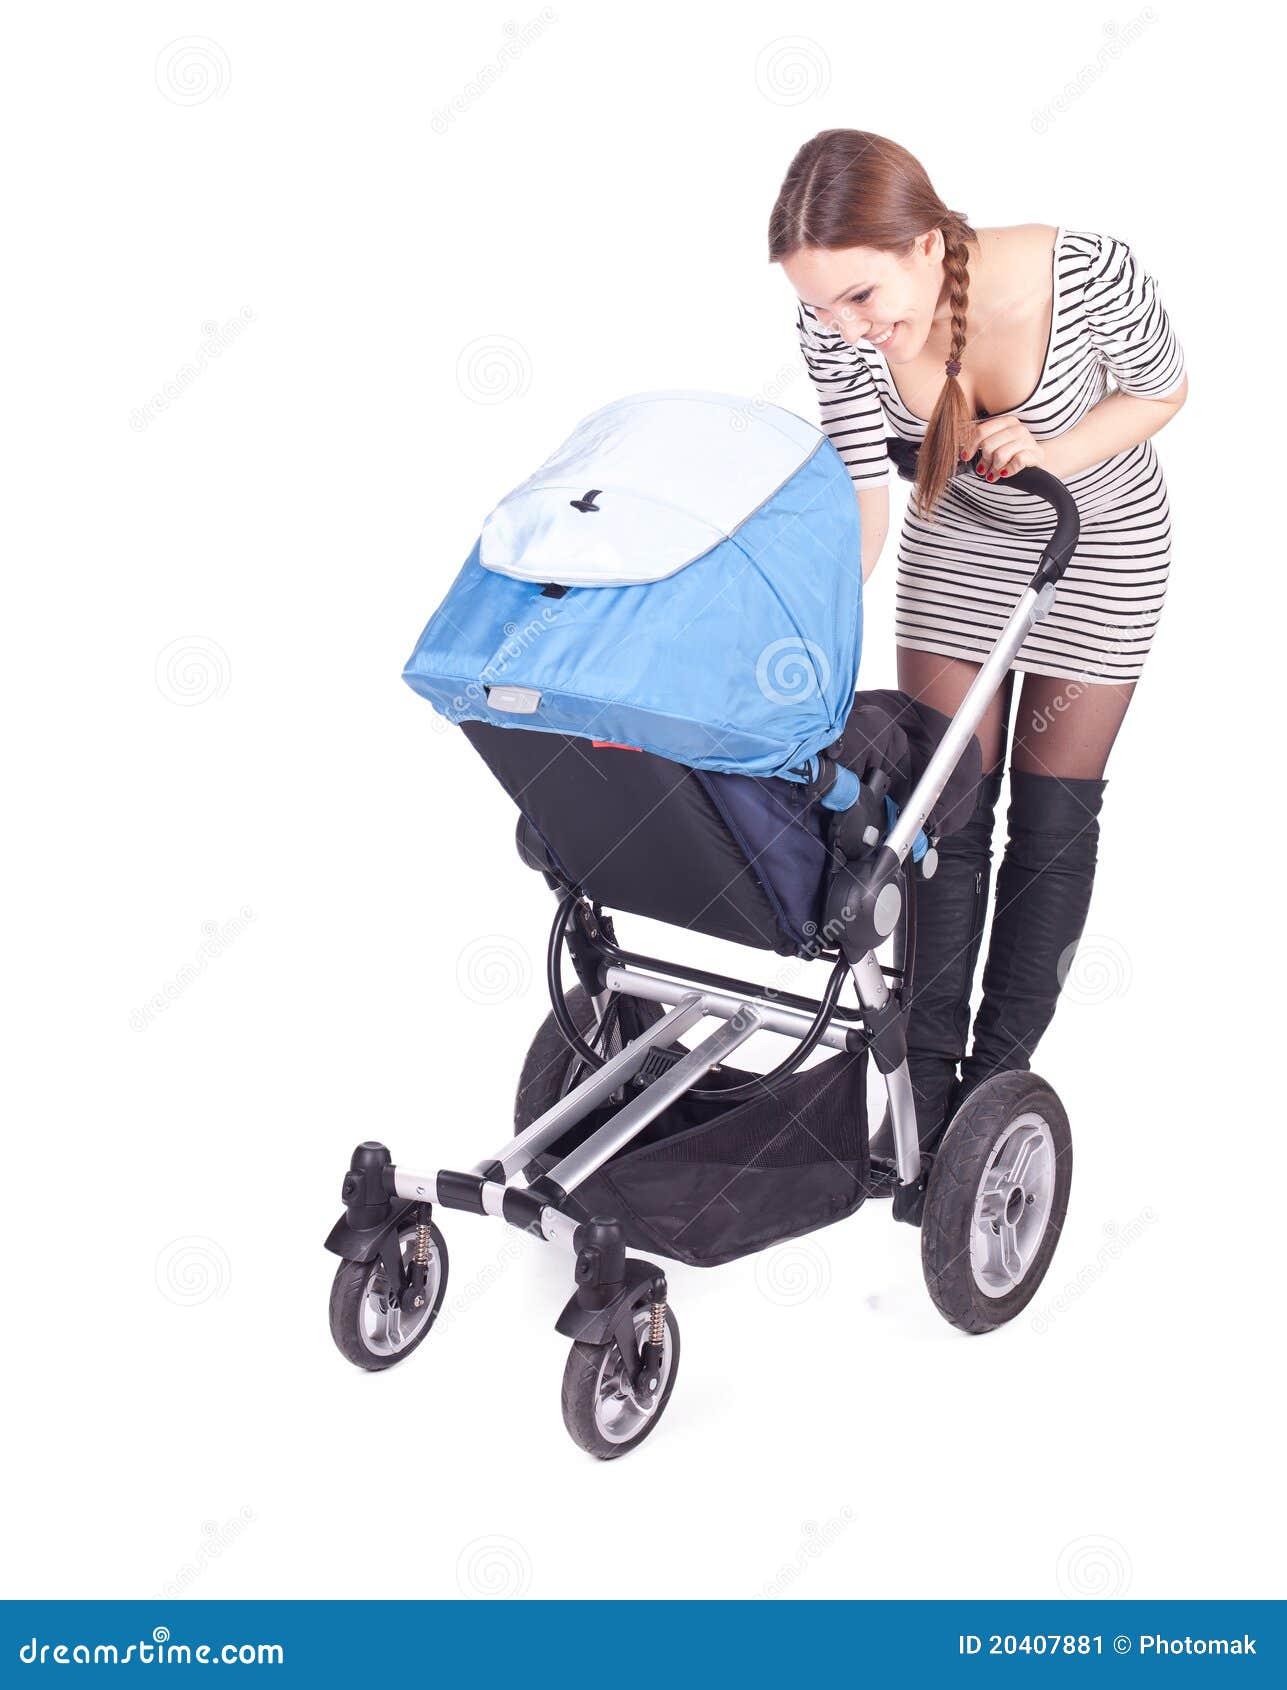 buggy stroller for baby